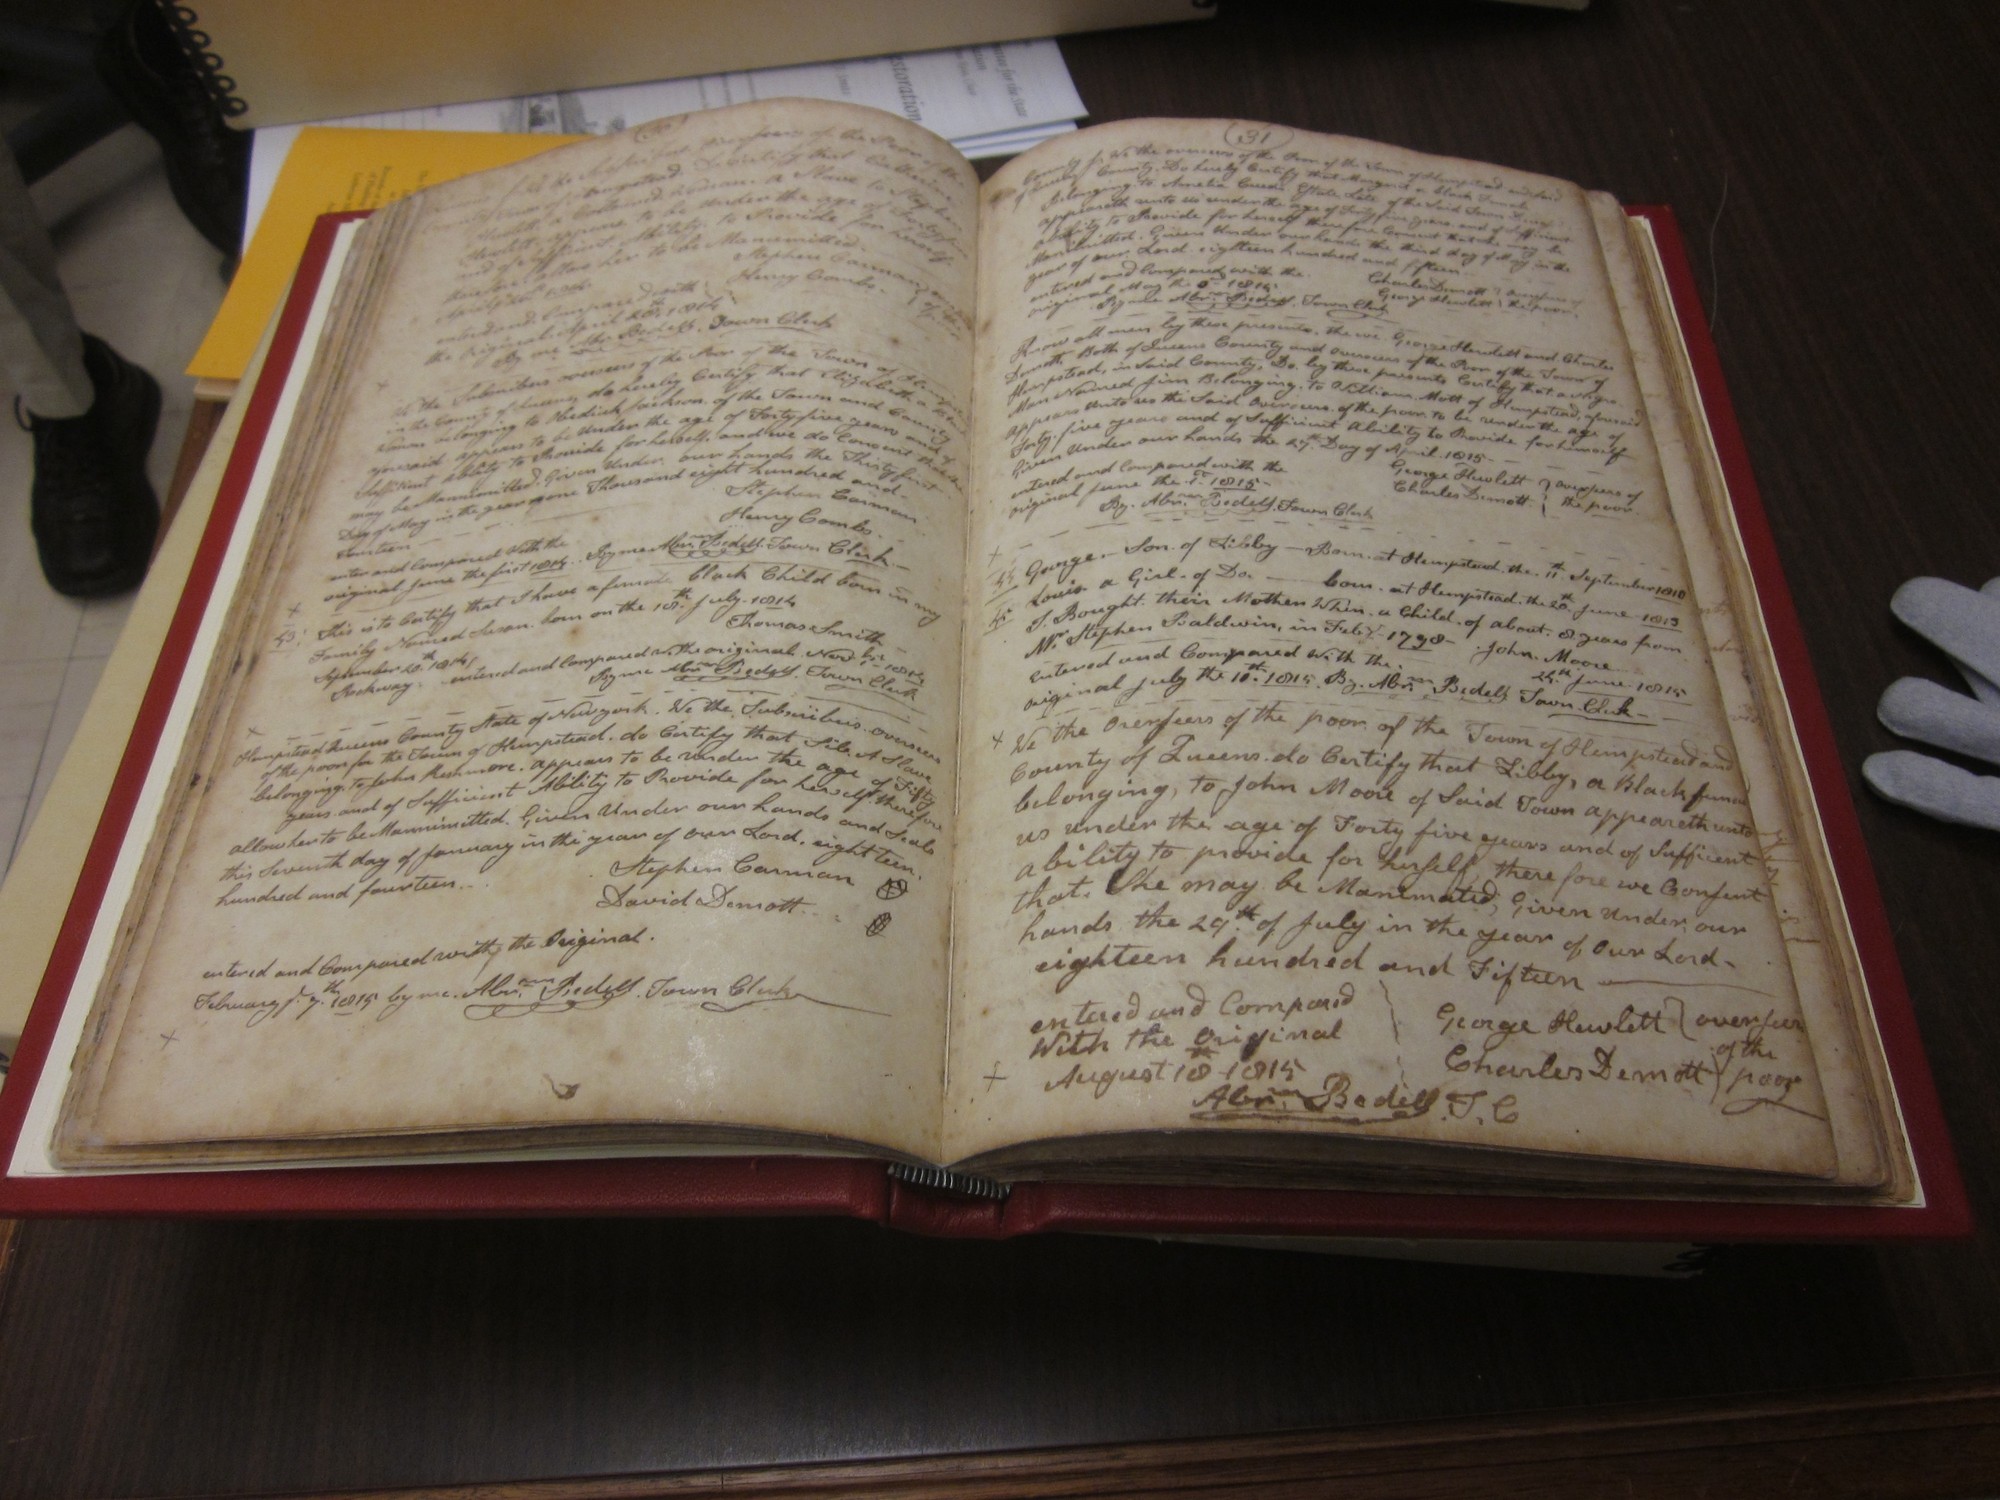 The oldest of the books in the Town of Hempstead Archives date back to 1707, though the bulk of them are from 1784 and after.